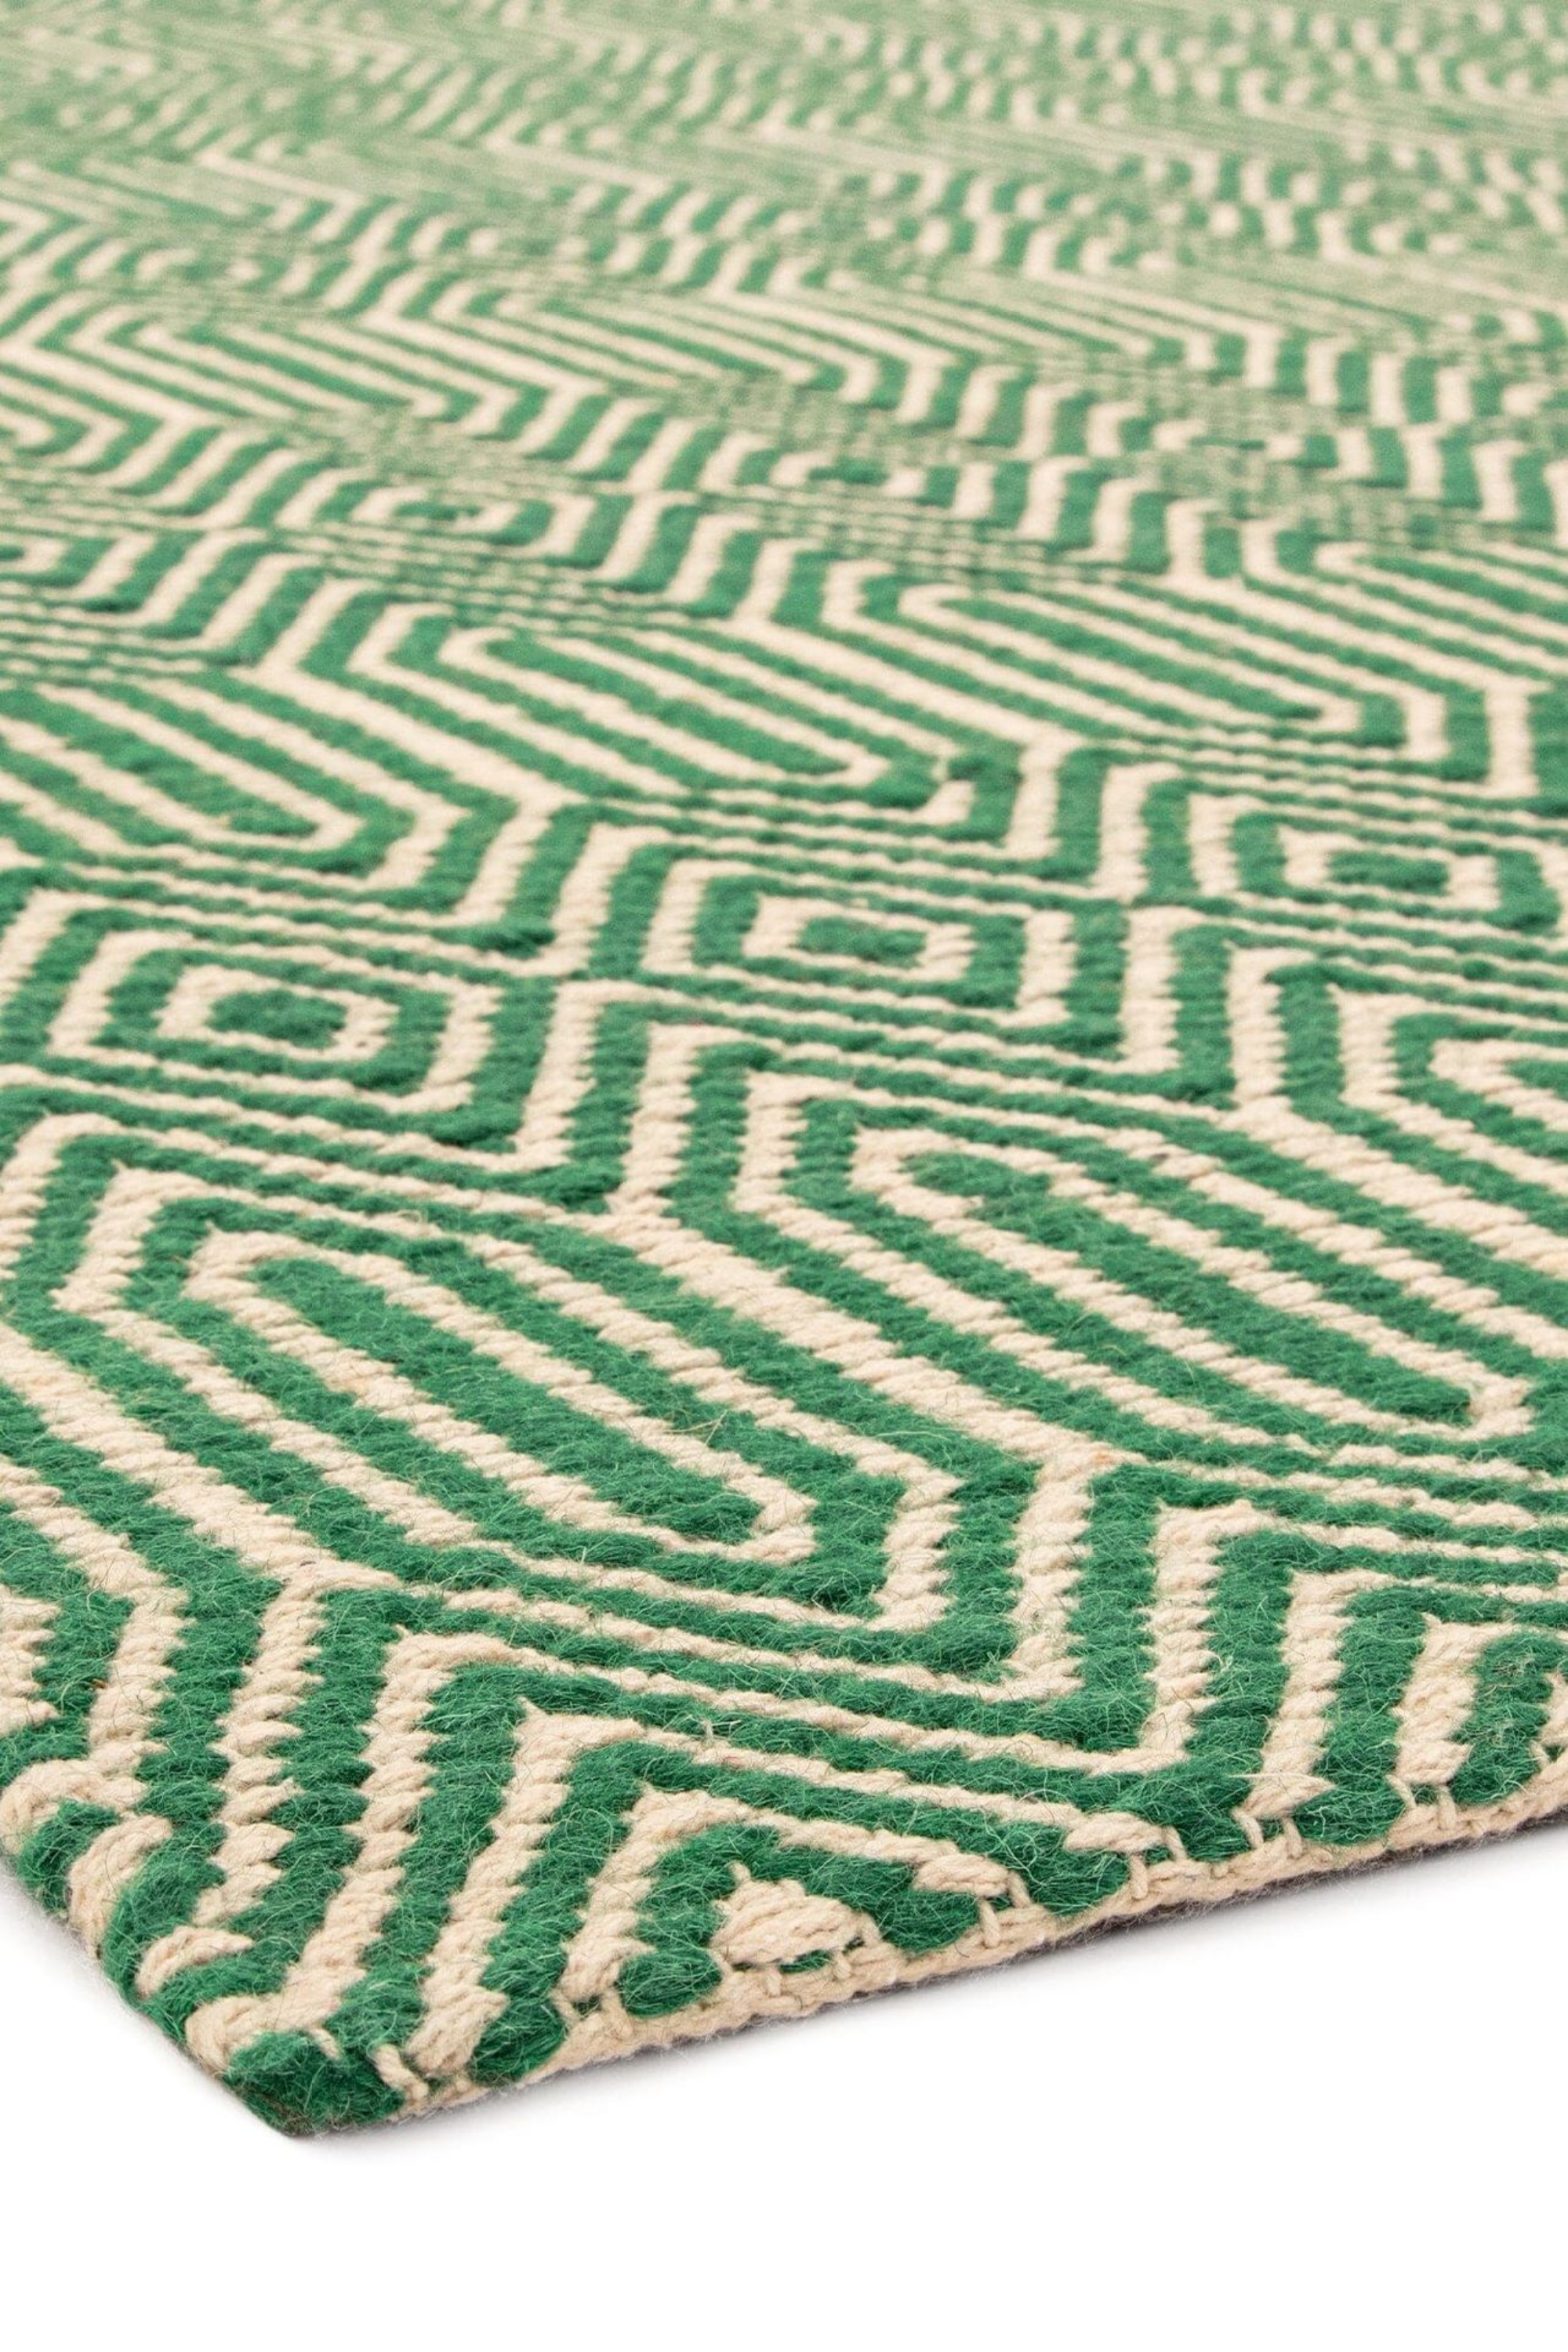 green and white runner with a geometric aztec design